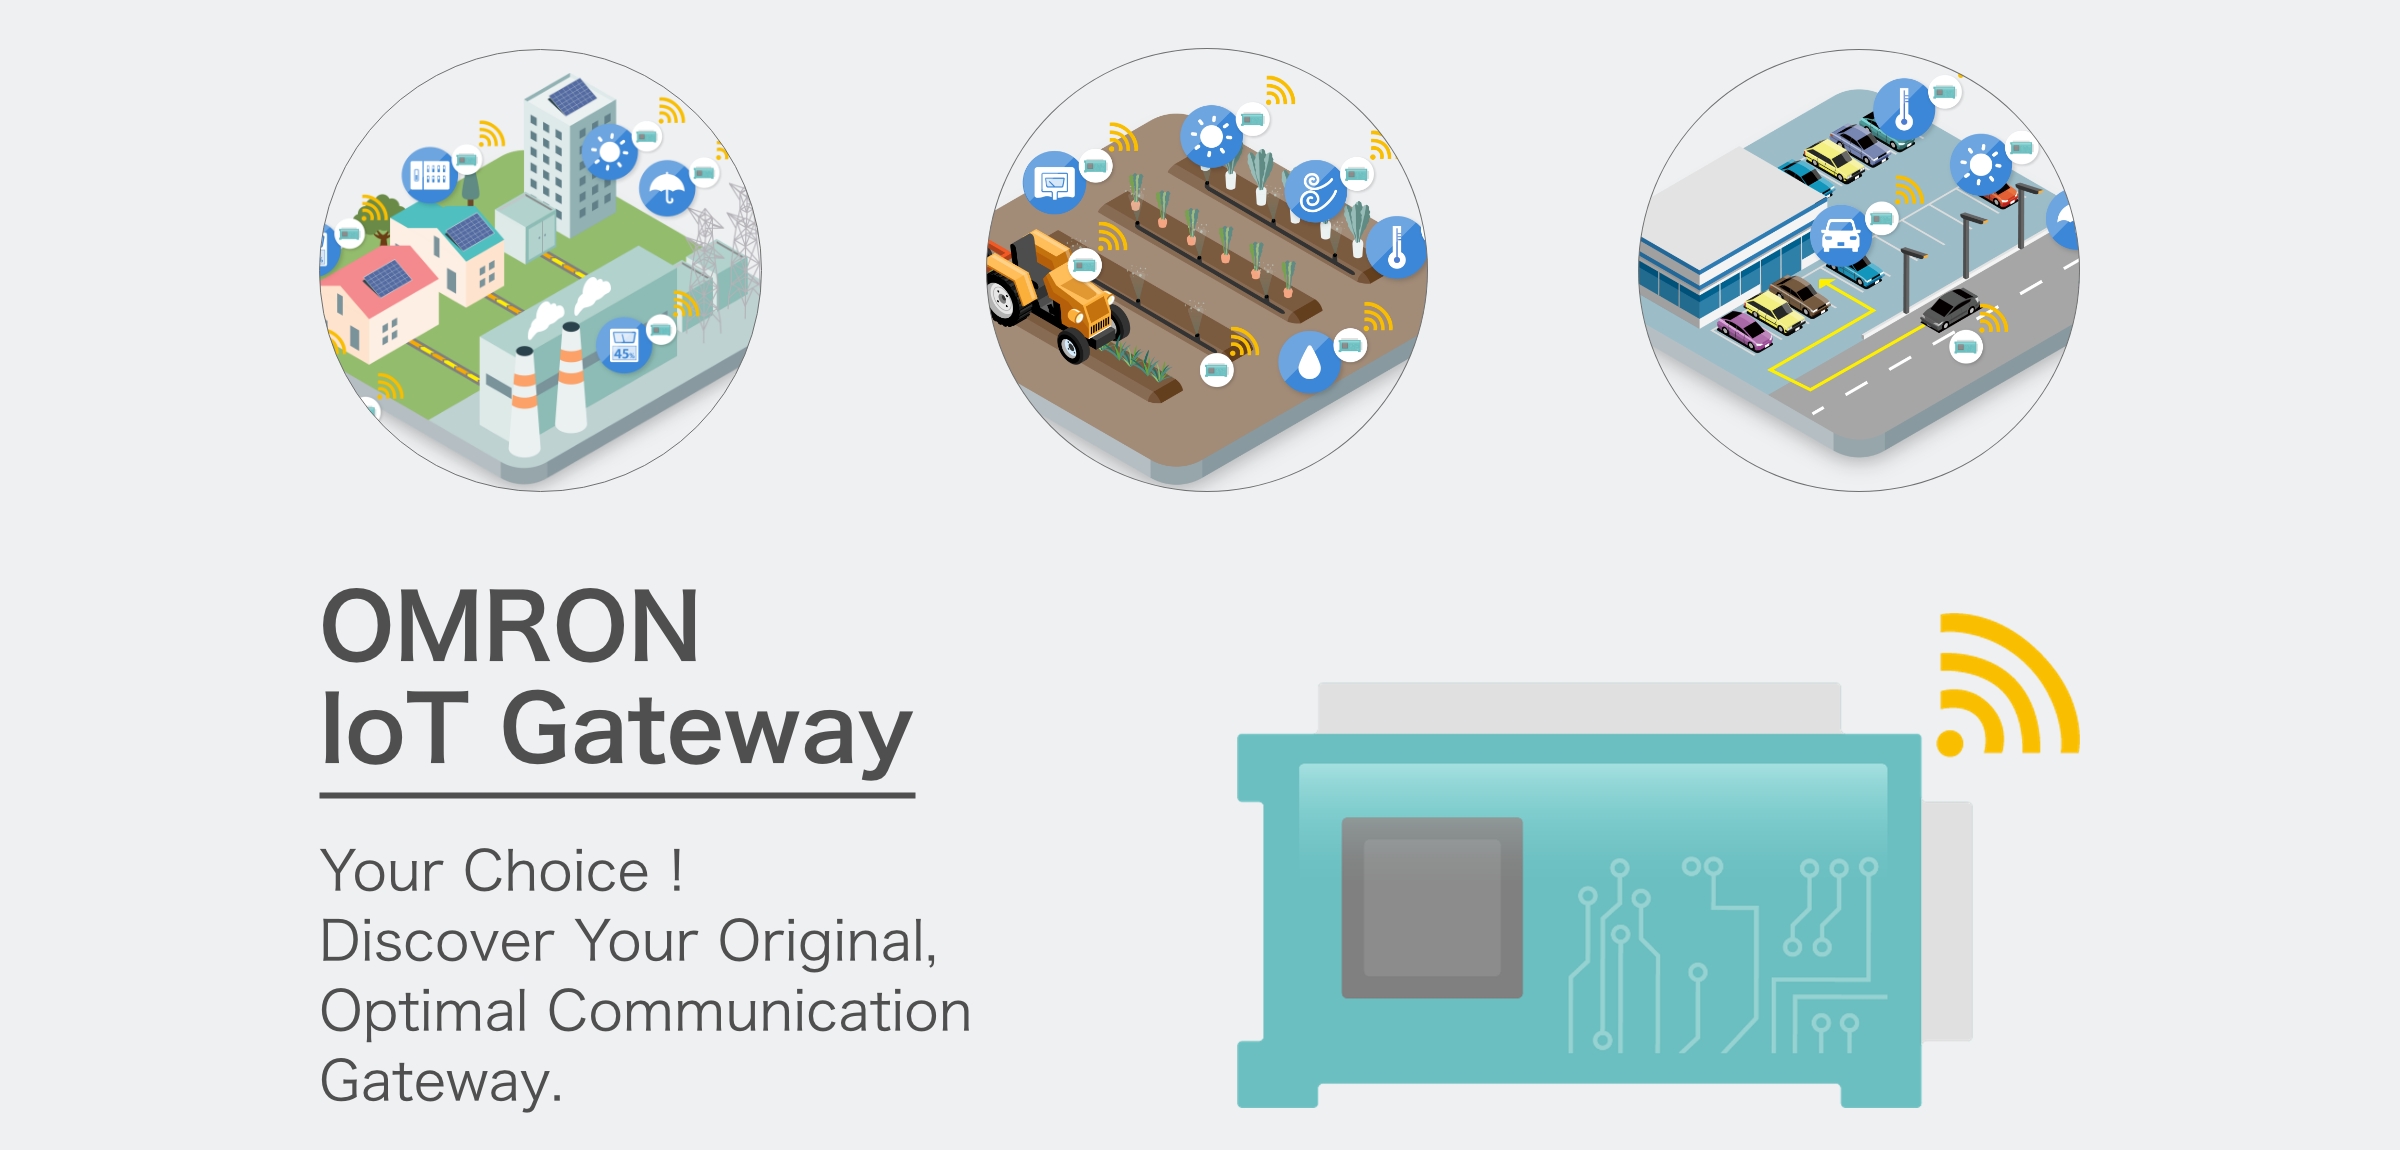 Your Choice ! Discover Your Original, Optimal Communication Gateway.